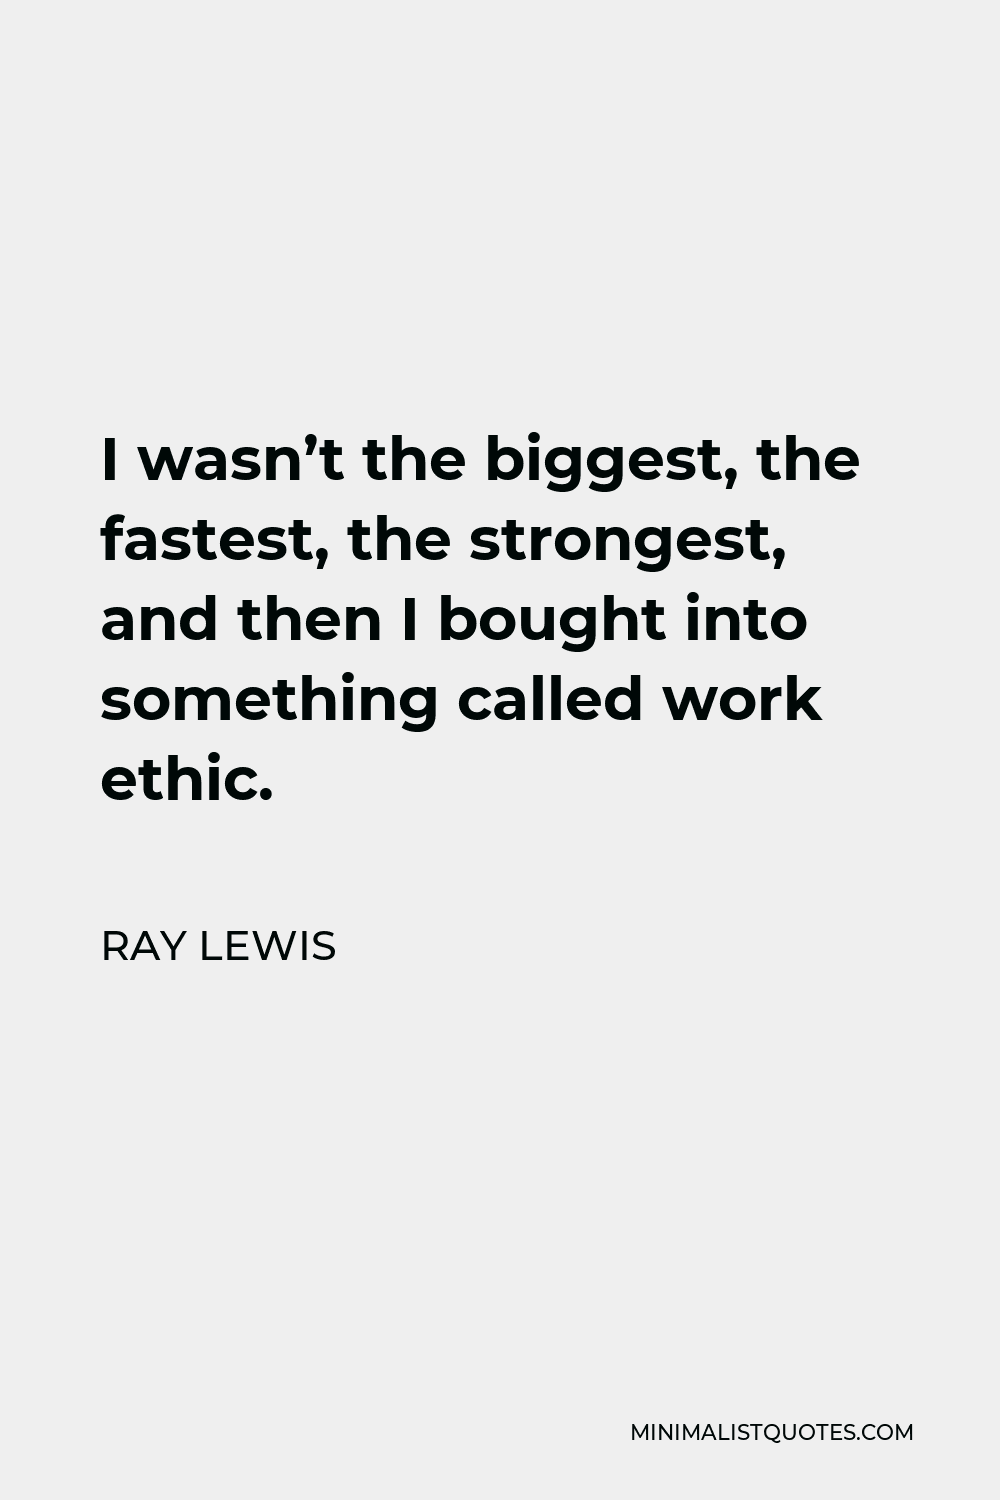 Ray Lewis Quote - I wasn’t the biggest, the fastest, the strongest, and then I bought into something called work ethic.